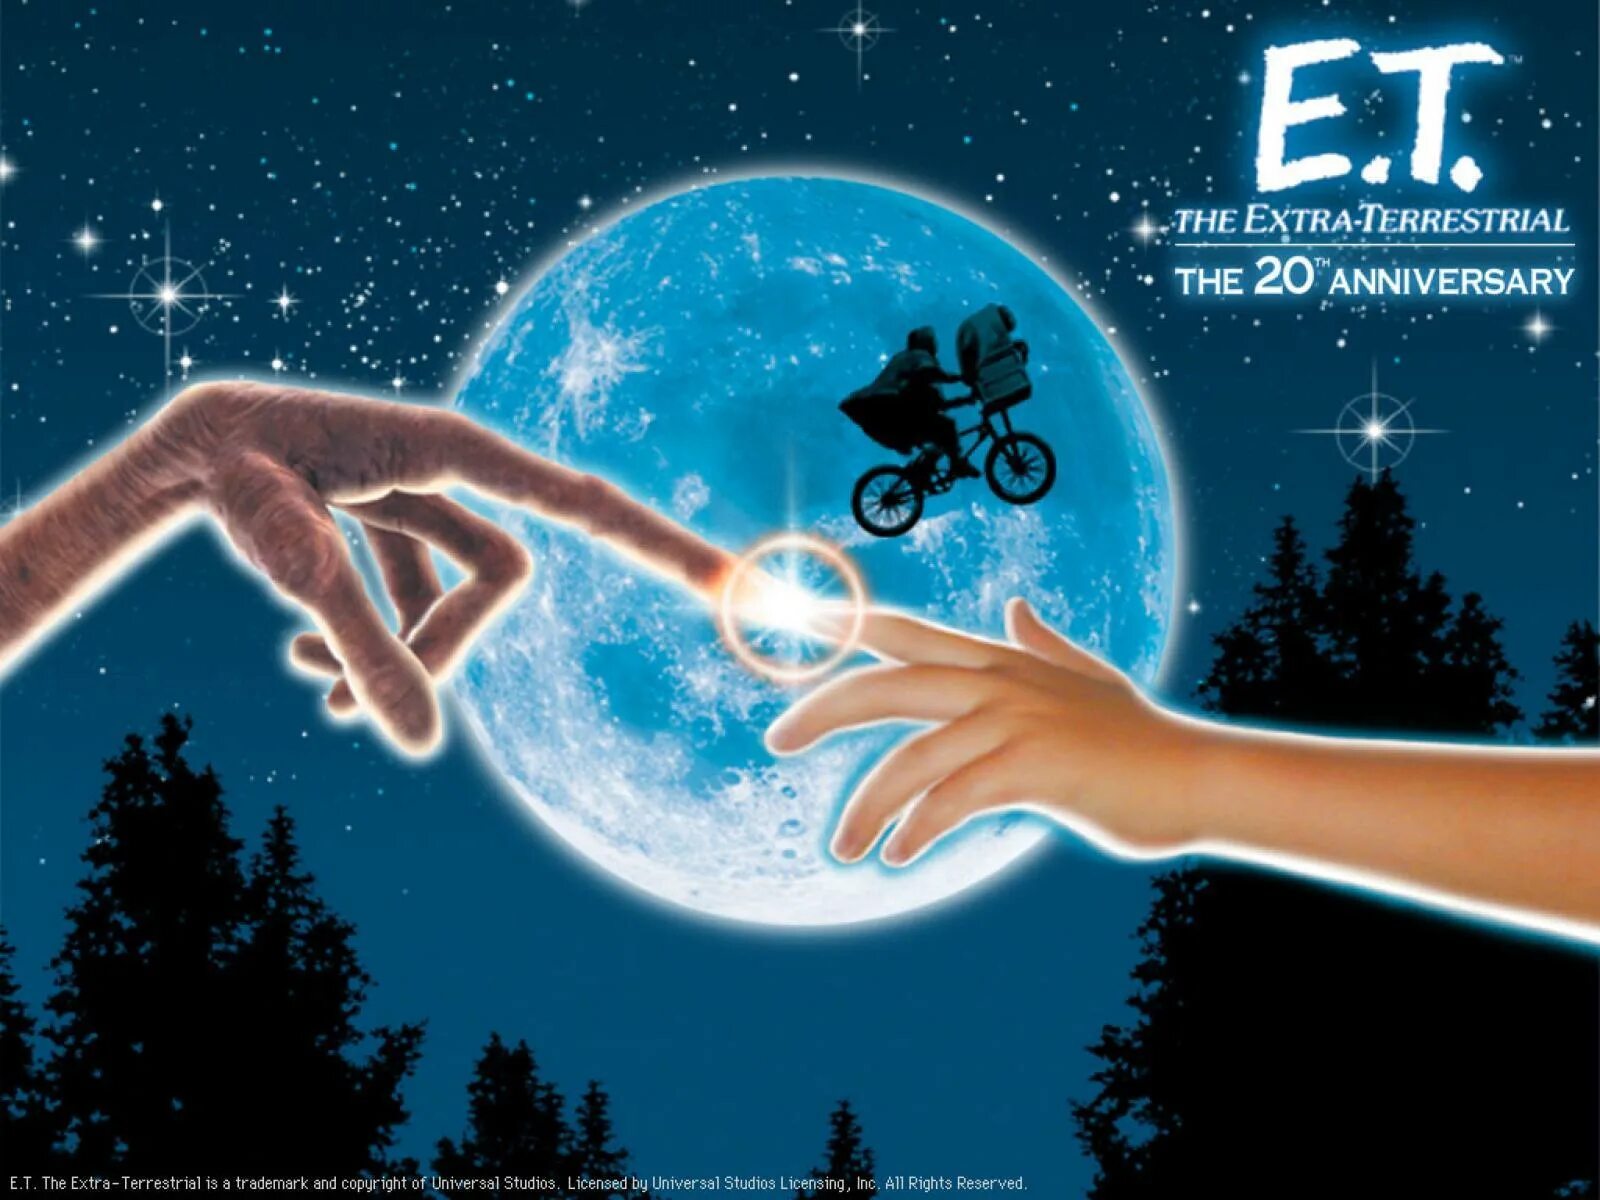 The extra years are. E.T. - the Extra-Terrestrial. E.T. the Extra-Terrestrial обои. Инопланетянин Спилберг Постер.